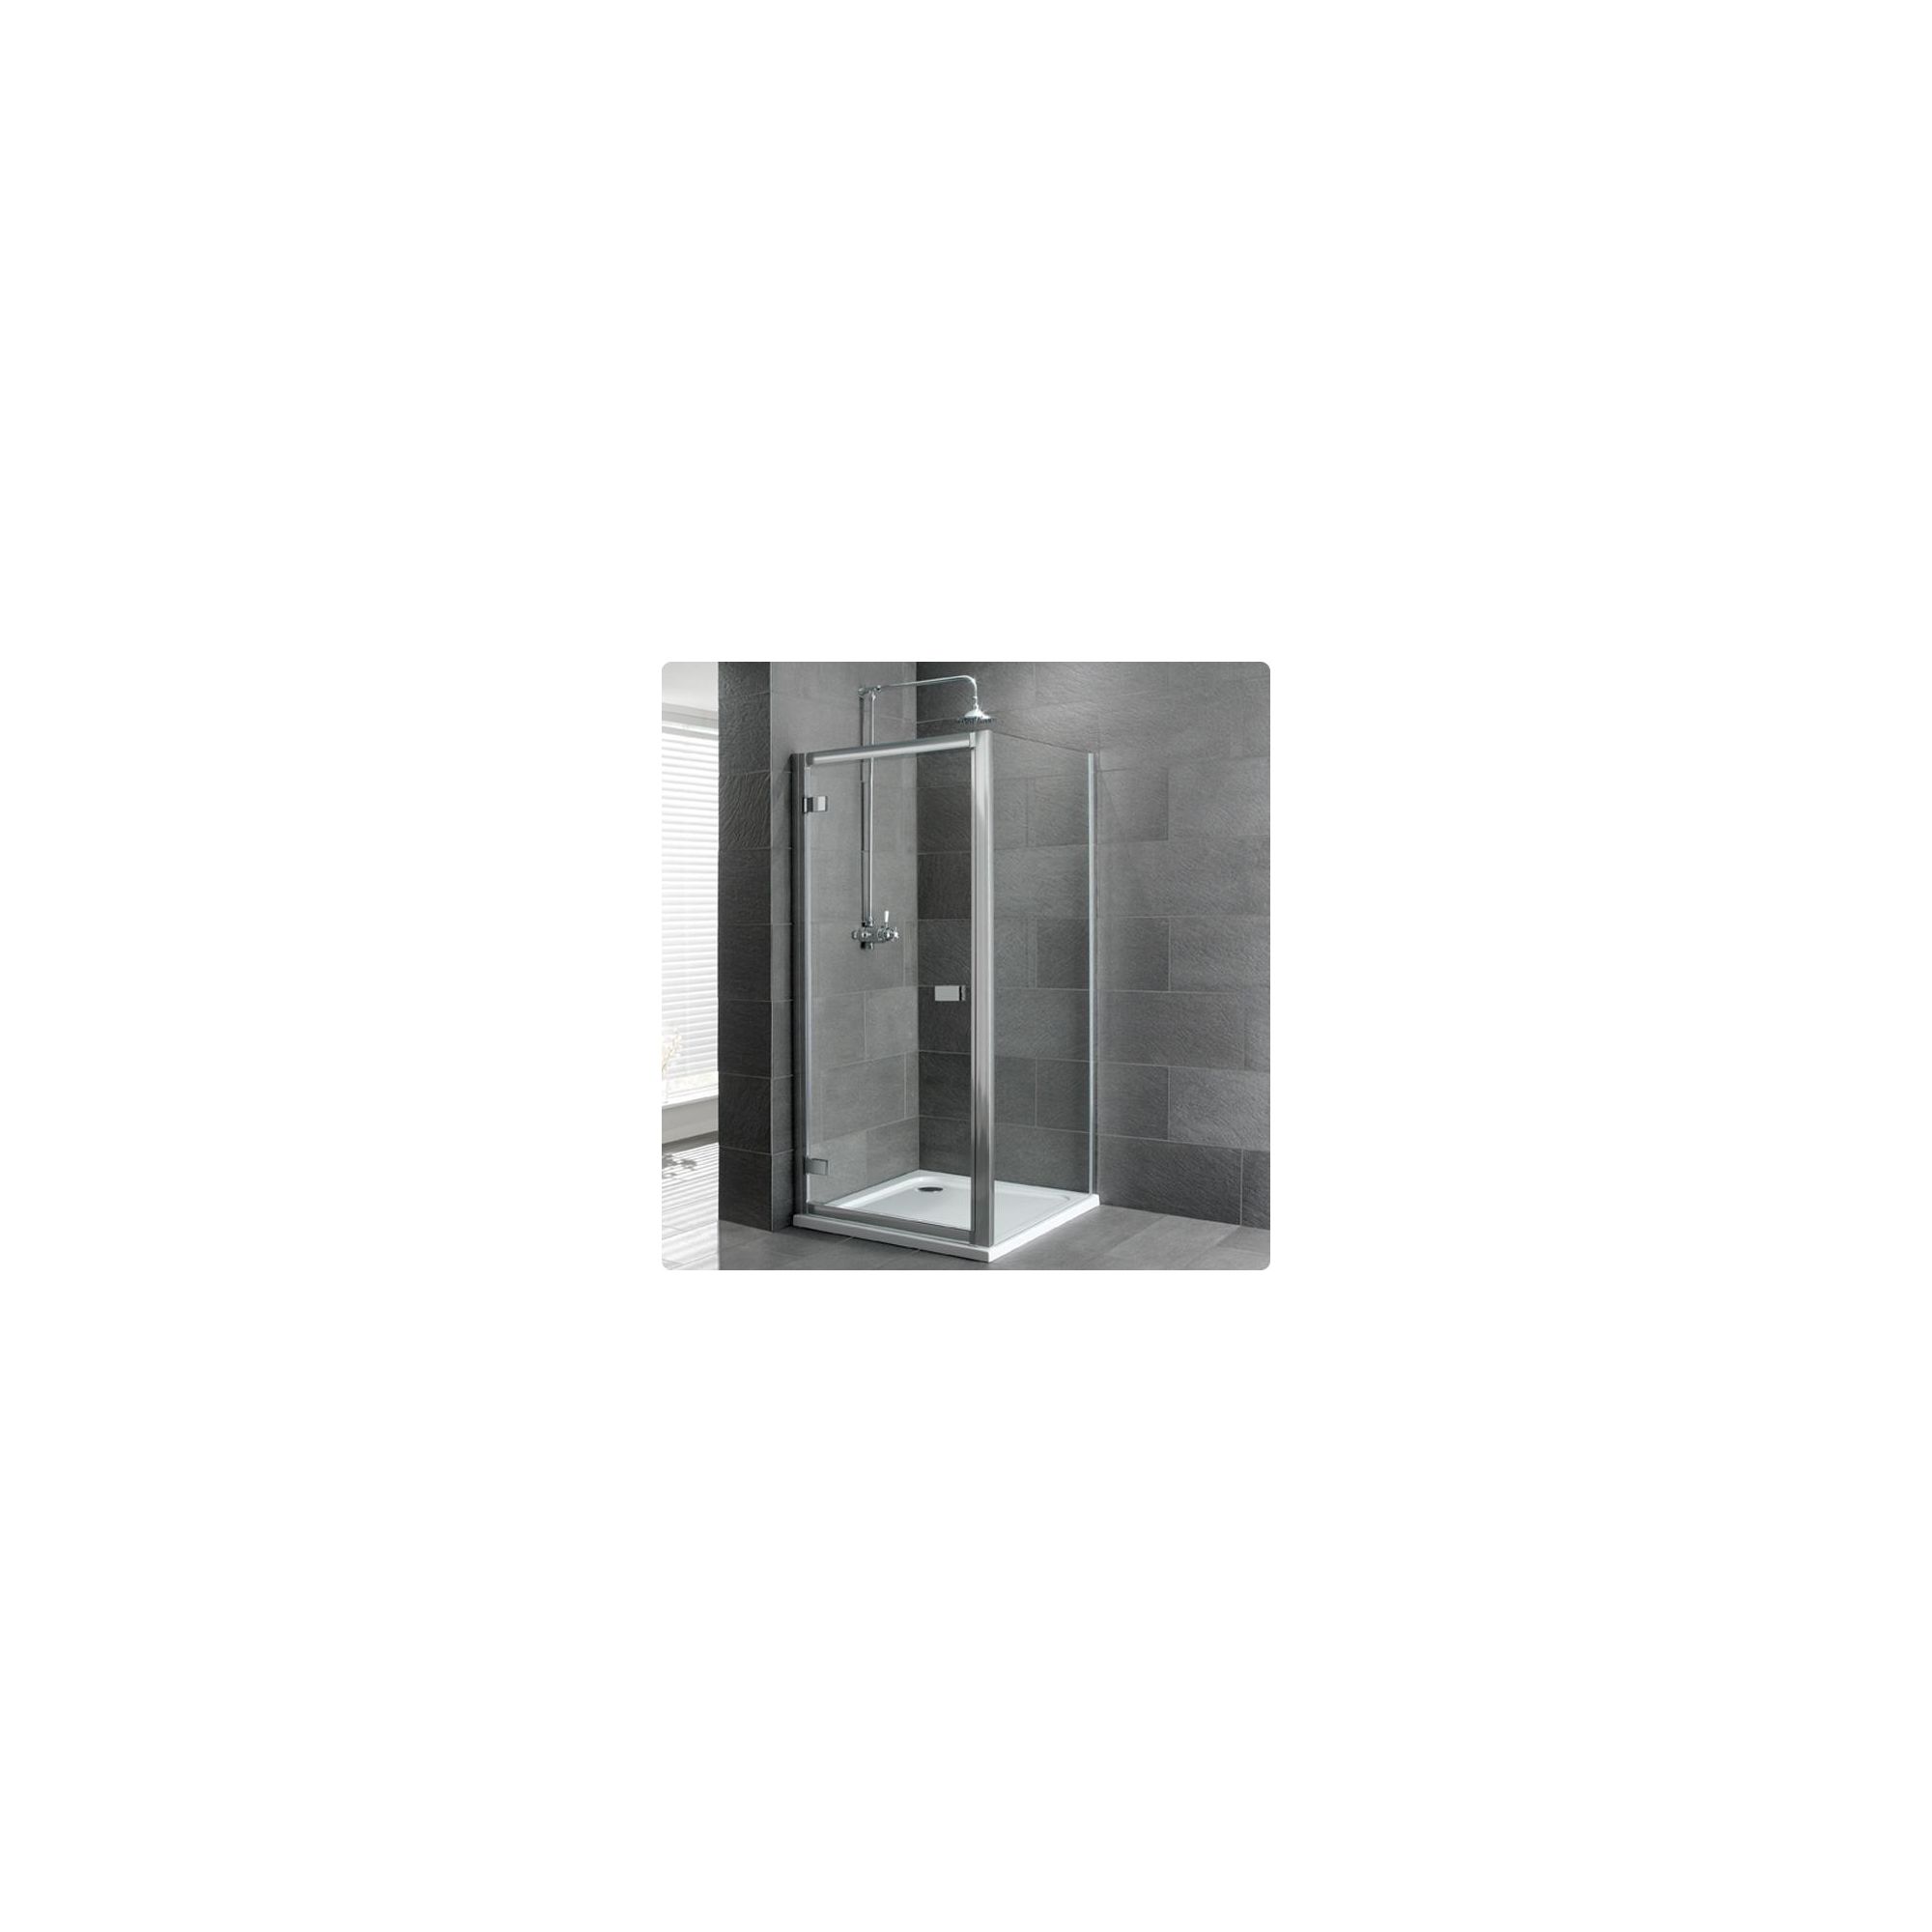 Duchy Select Silver Hinged Door Shower Enclosure, 900mm x 800mm, Standard Tray, 6mm Glass at Tesco Direct